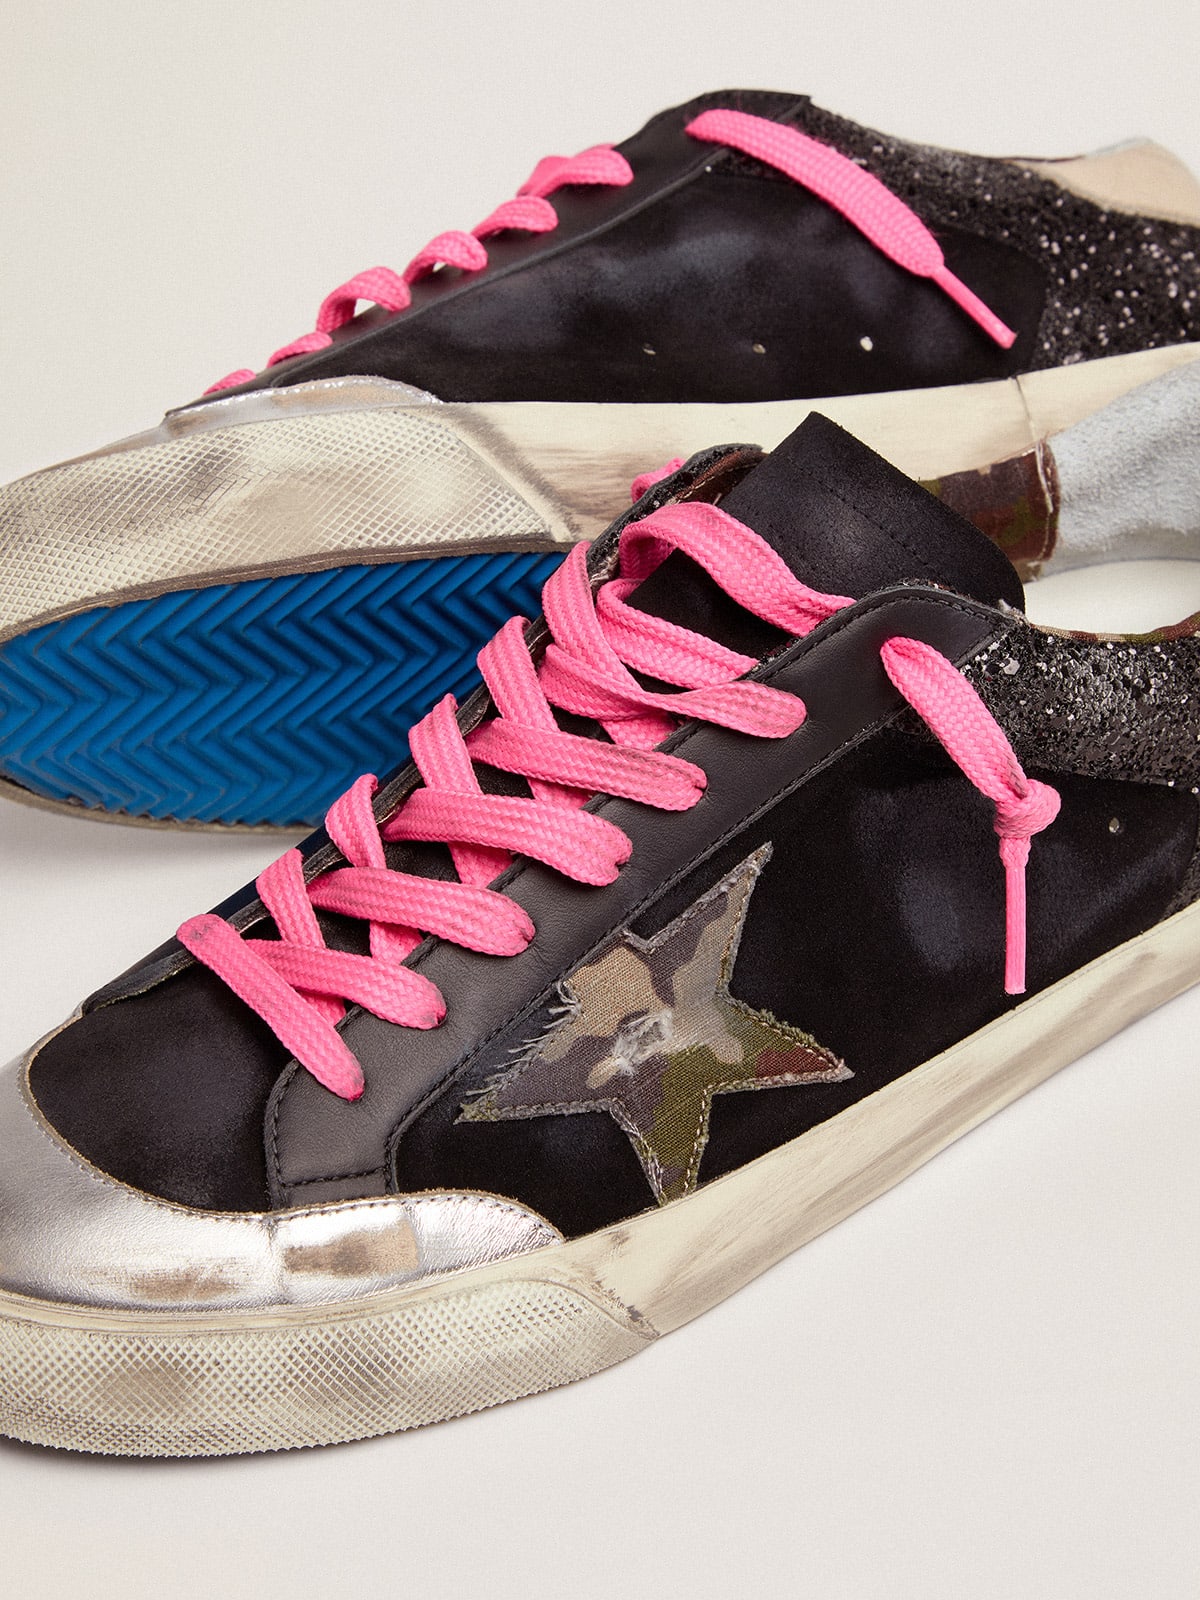 Golden Goose - Men's Super-Star in black glitter and suede with camouflage star in 